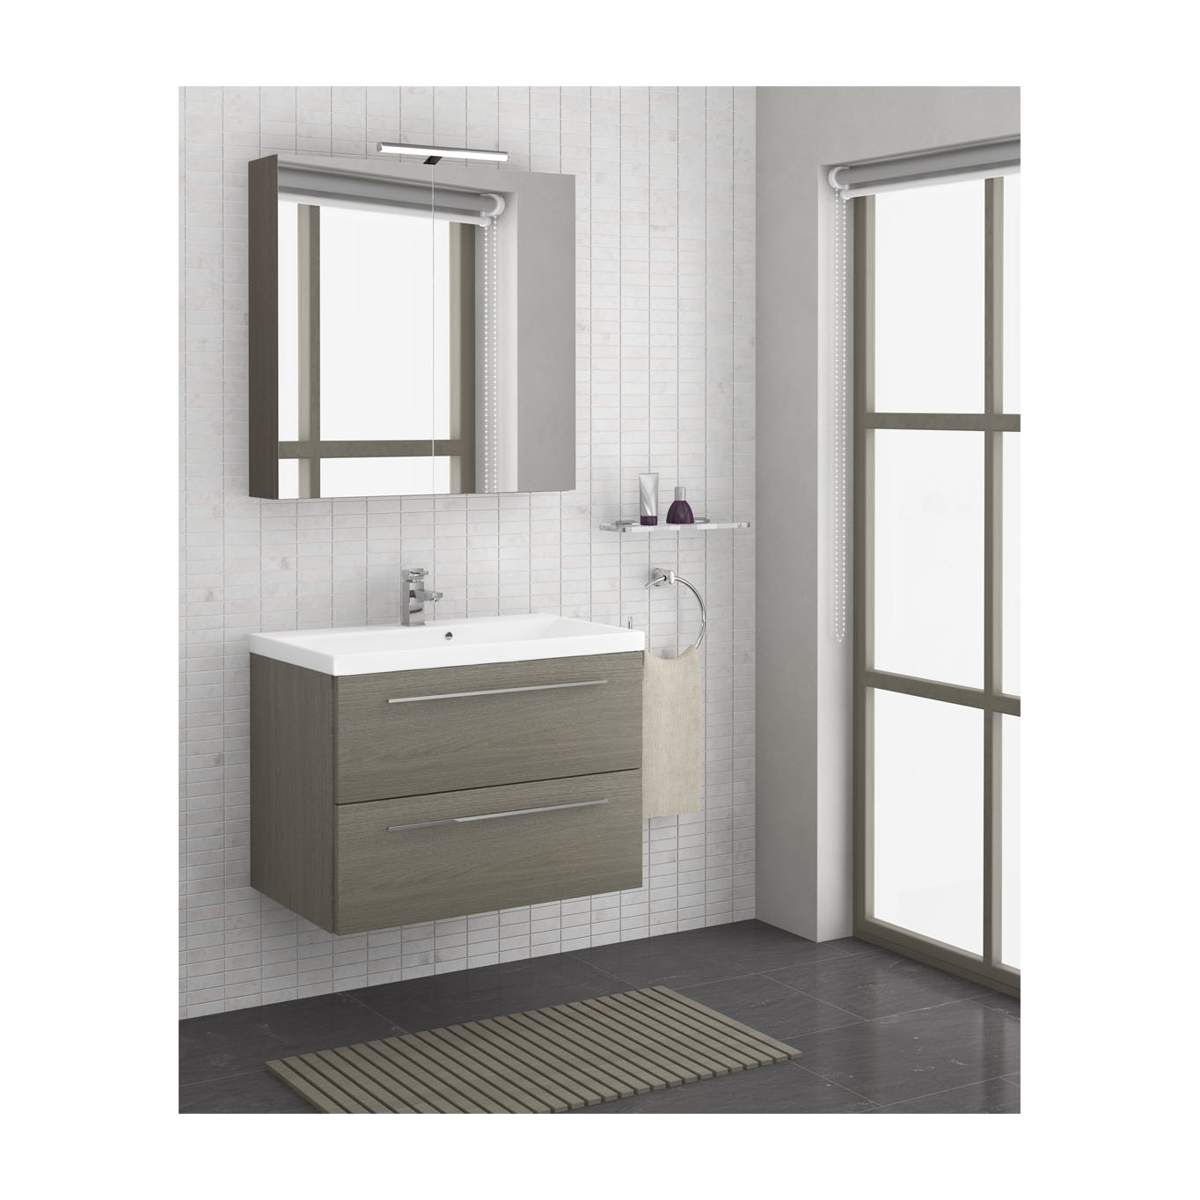 JTP Pace Units 600mm Wall Mounted Unit with Drawers and Basin in Grey (PWM603GR + P600BS)